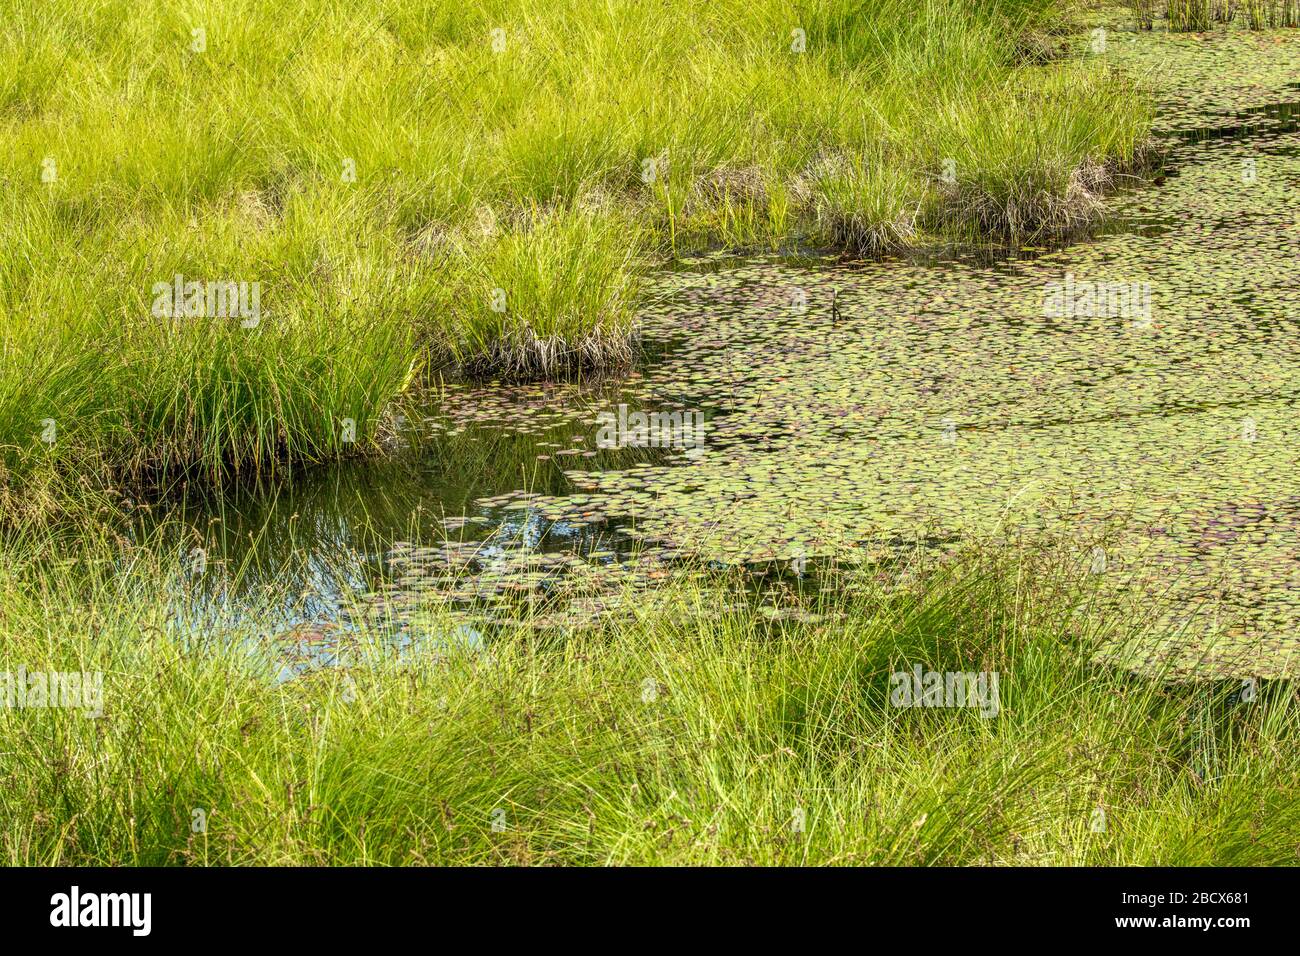 Nisqually National Wildlife Refuge, Nisqually, Washington, USA.  Water lily pads covering a shallow pond. Stock Photo